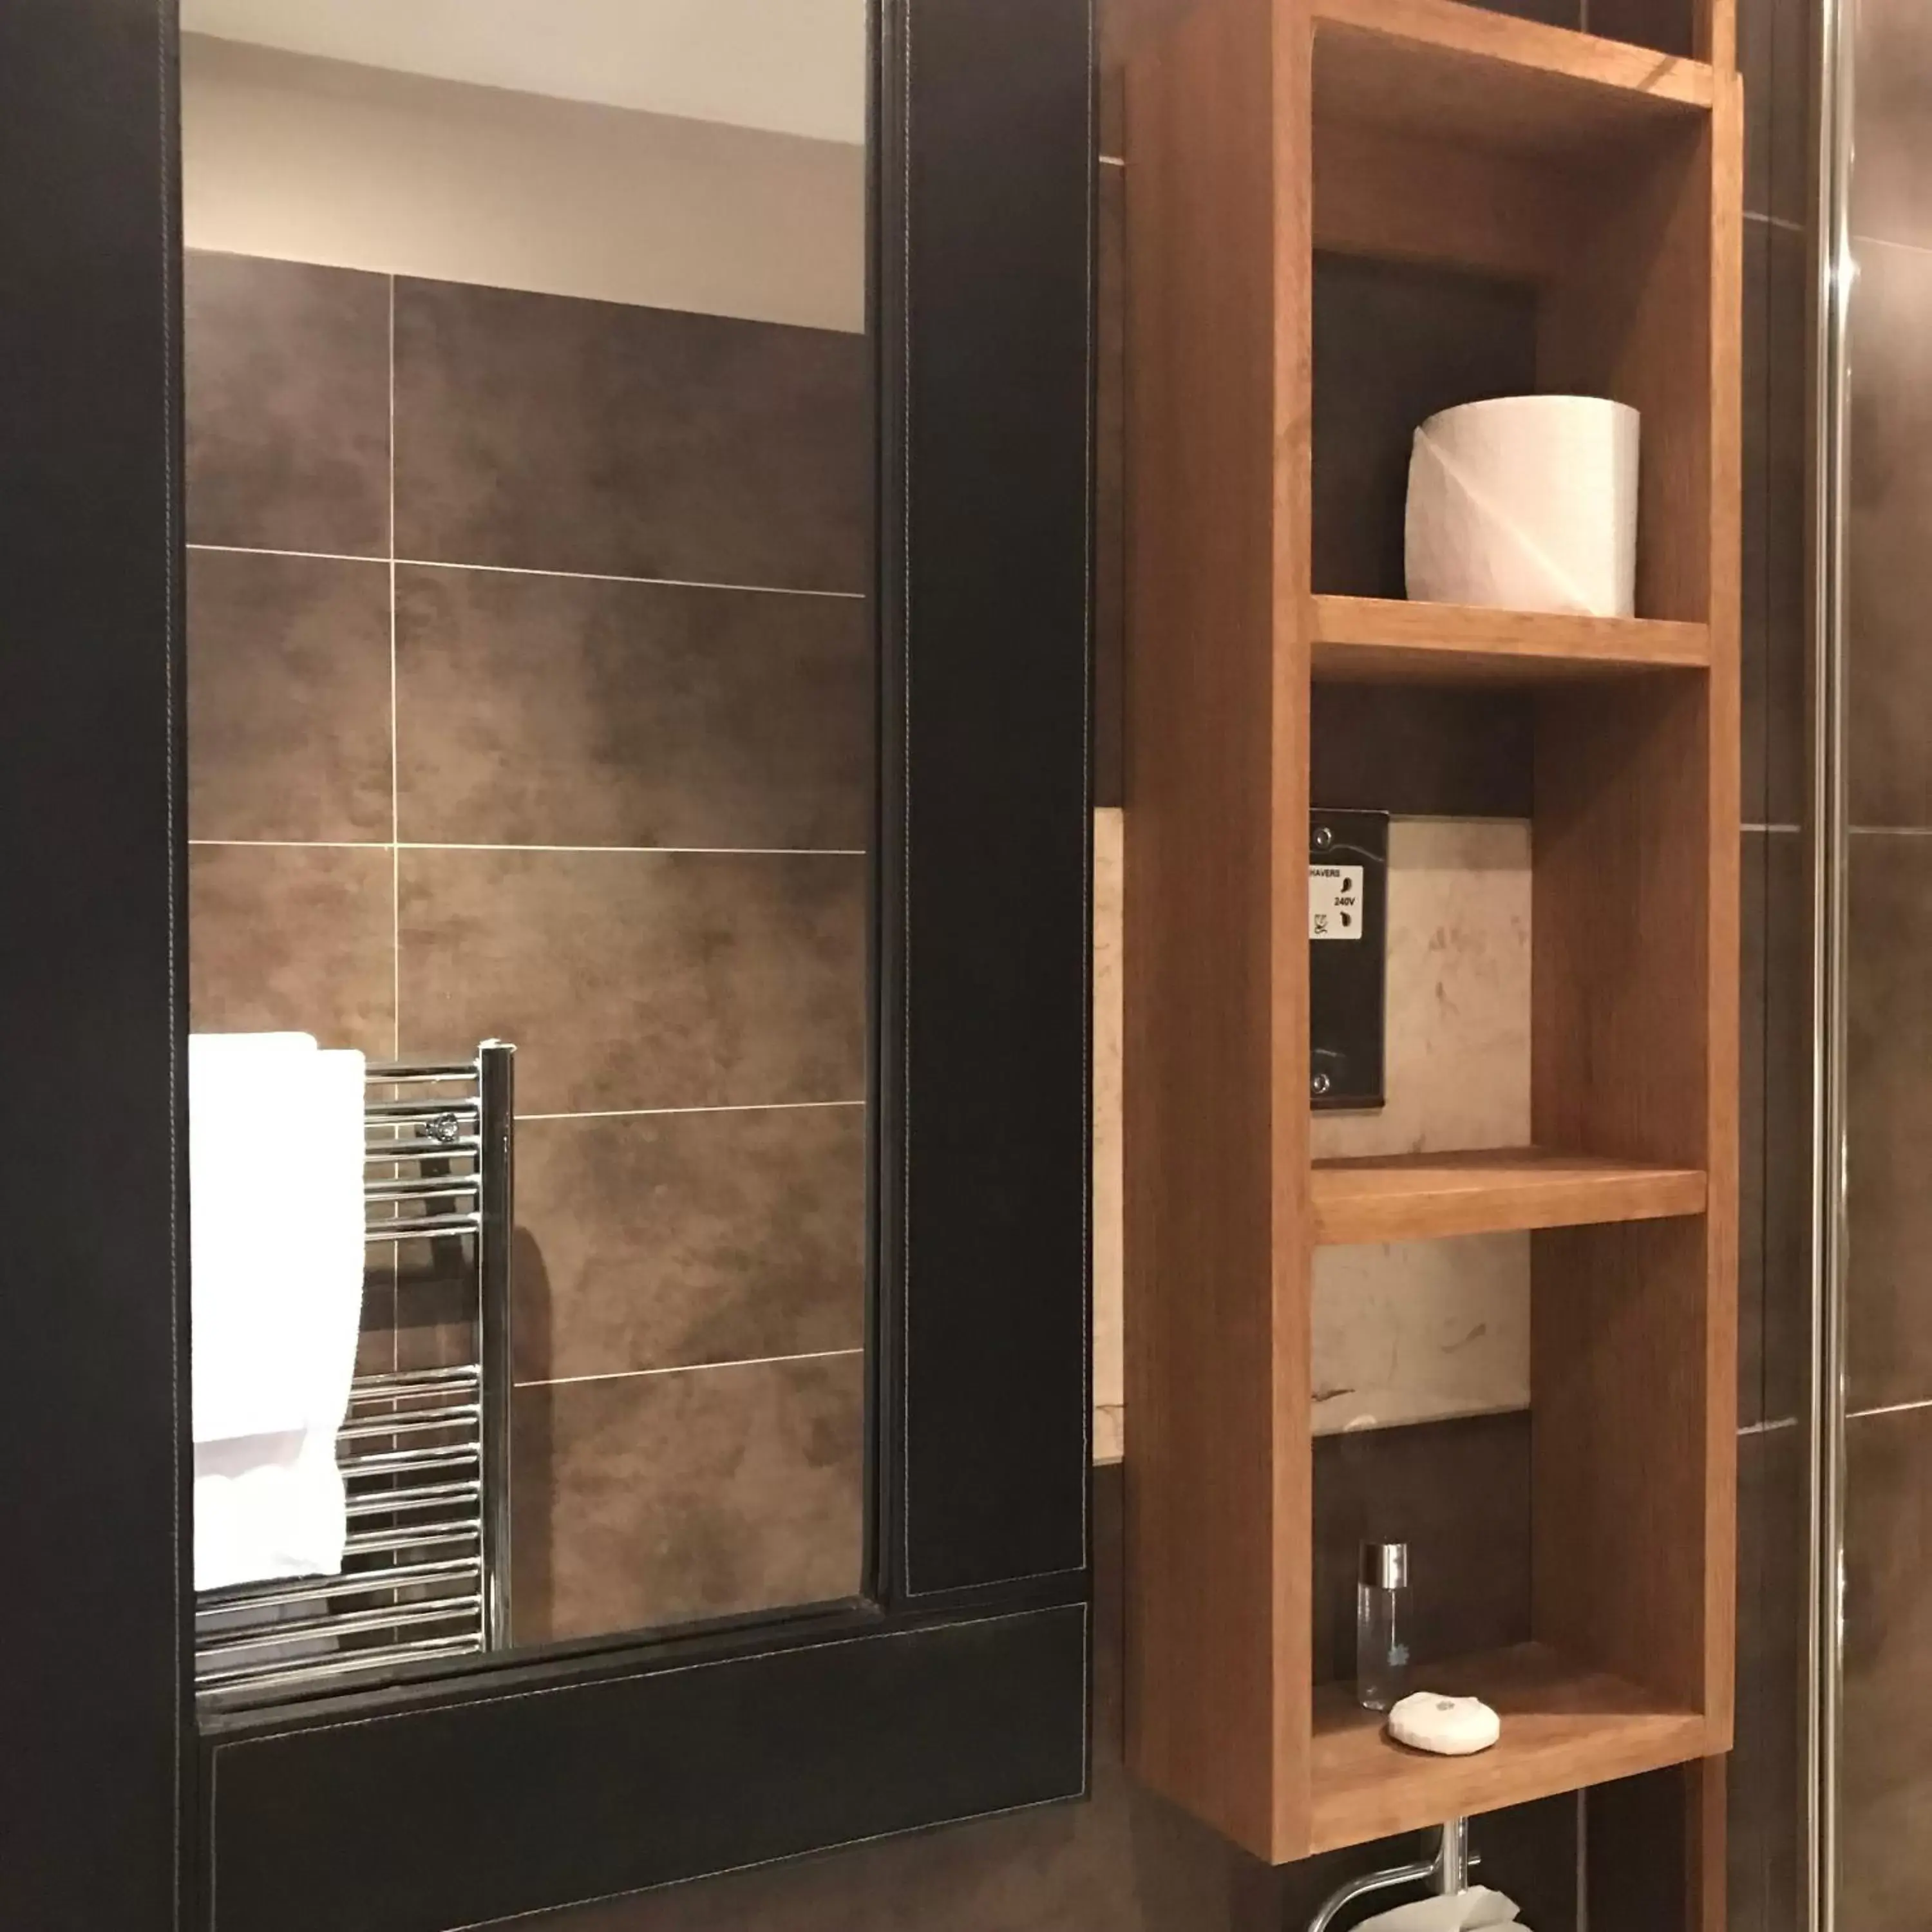 Shower, Bathroom in Ashtree House Hotel, Glasgow Airport & Paisley